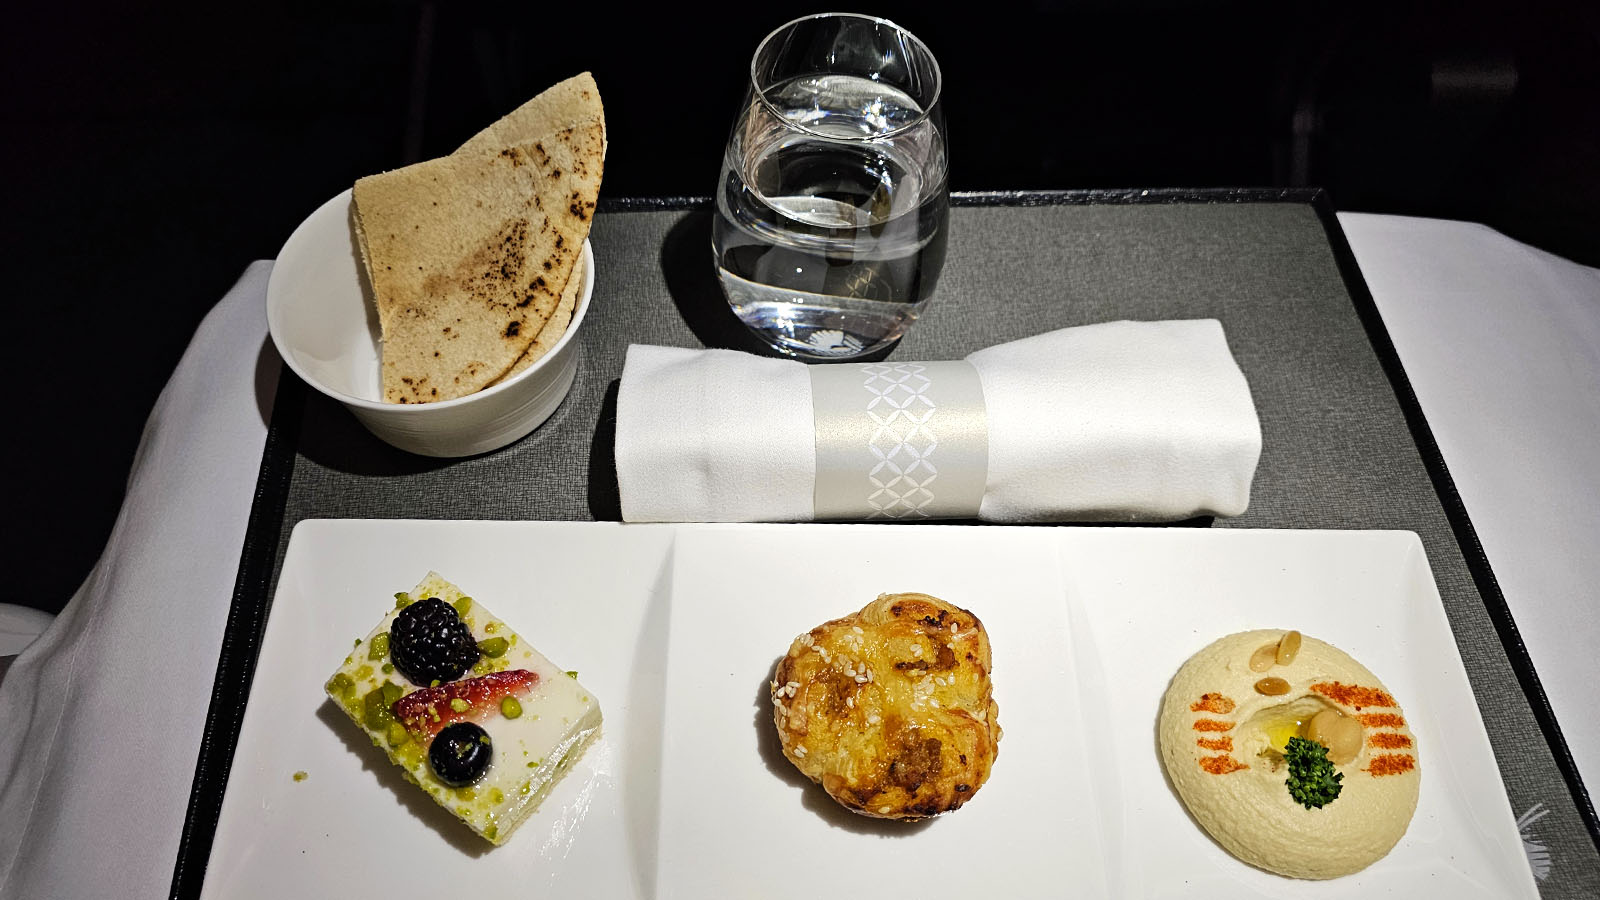 Nibbles in First Class on Qatar Airways' Airbus A320